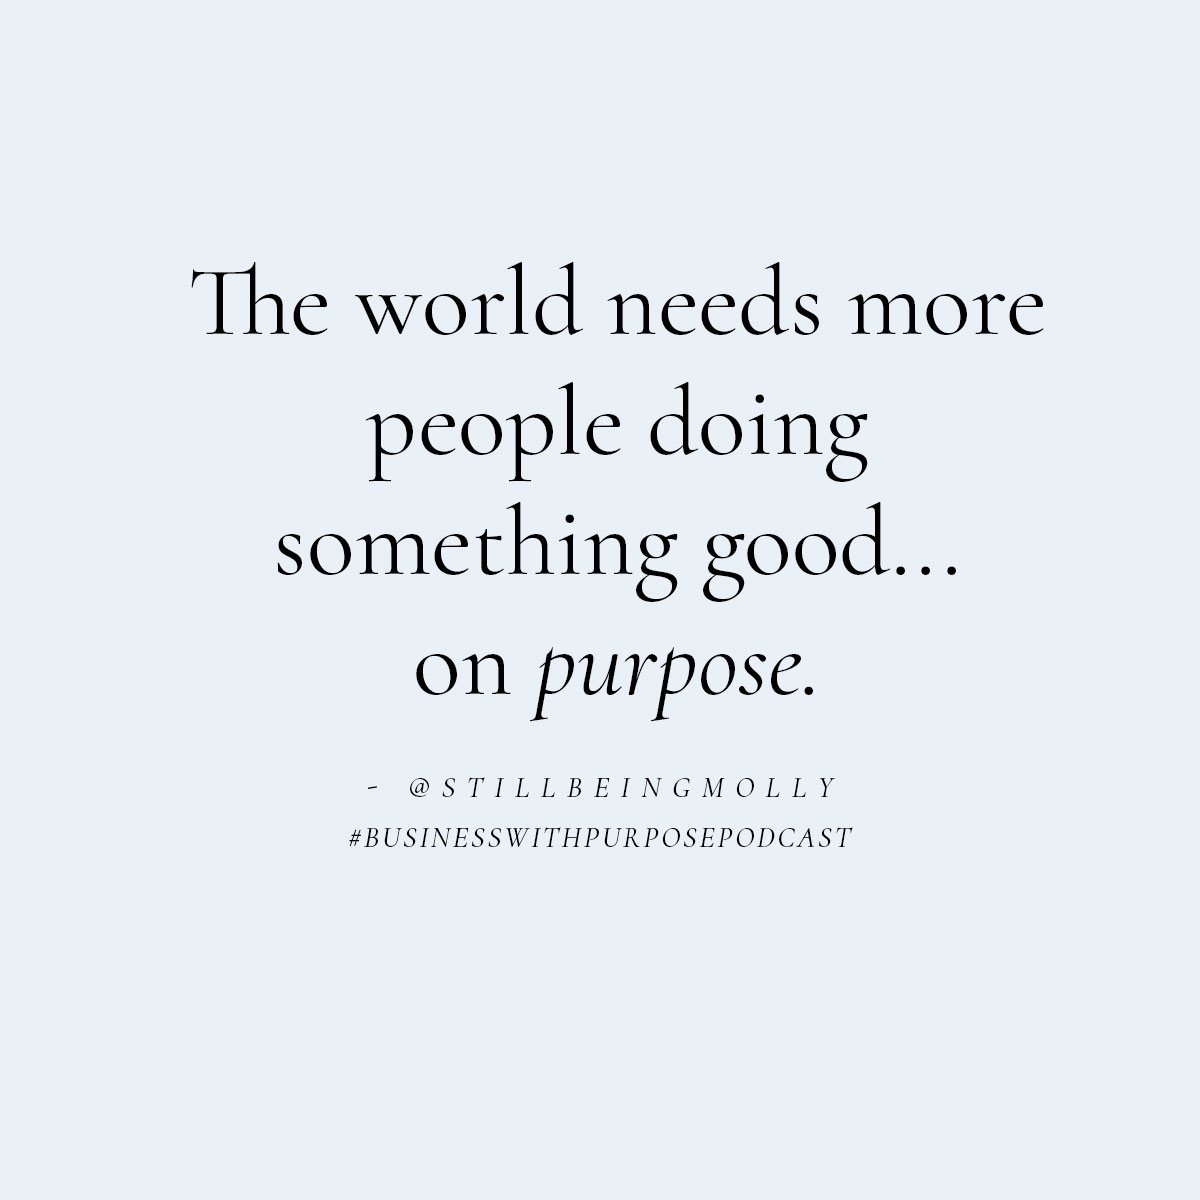 Business with Purpose Podcast - A podcast for people who want to change the world #businesswithpurposepodcast @stillbeingmolly